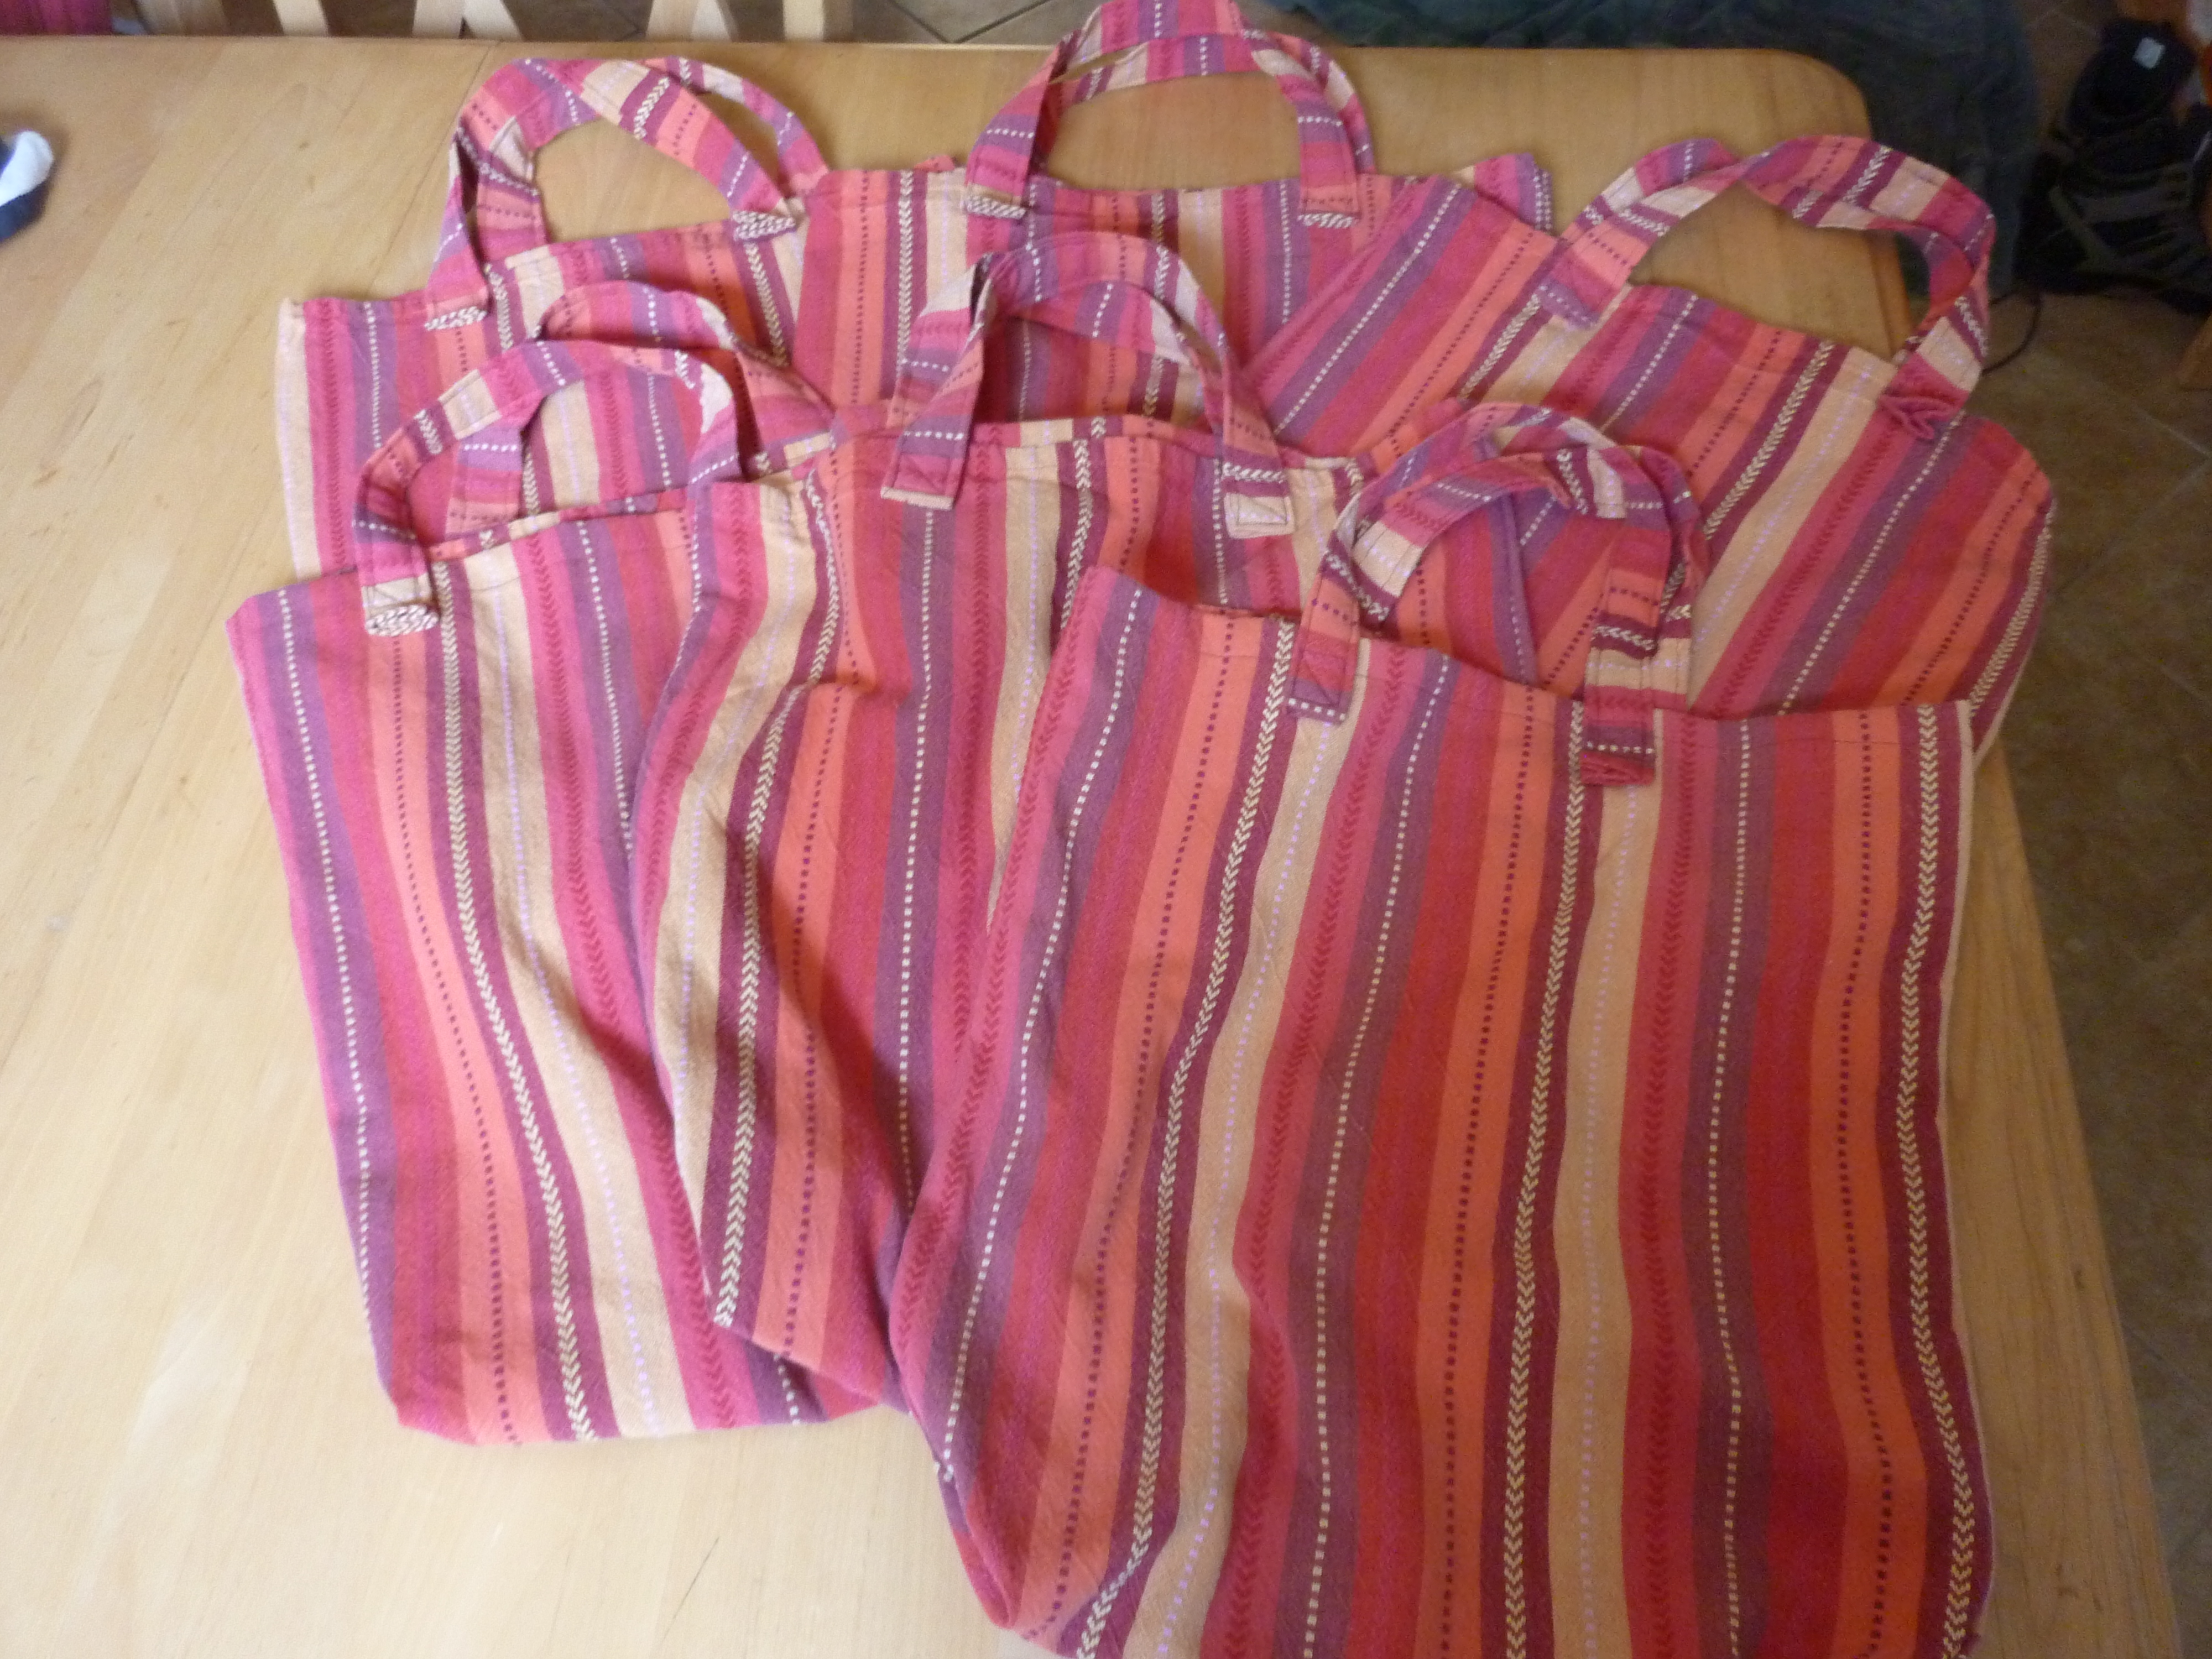 Striped bags